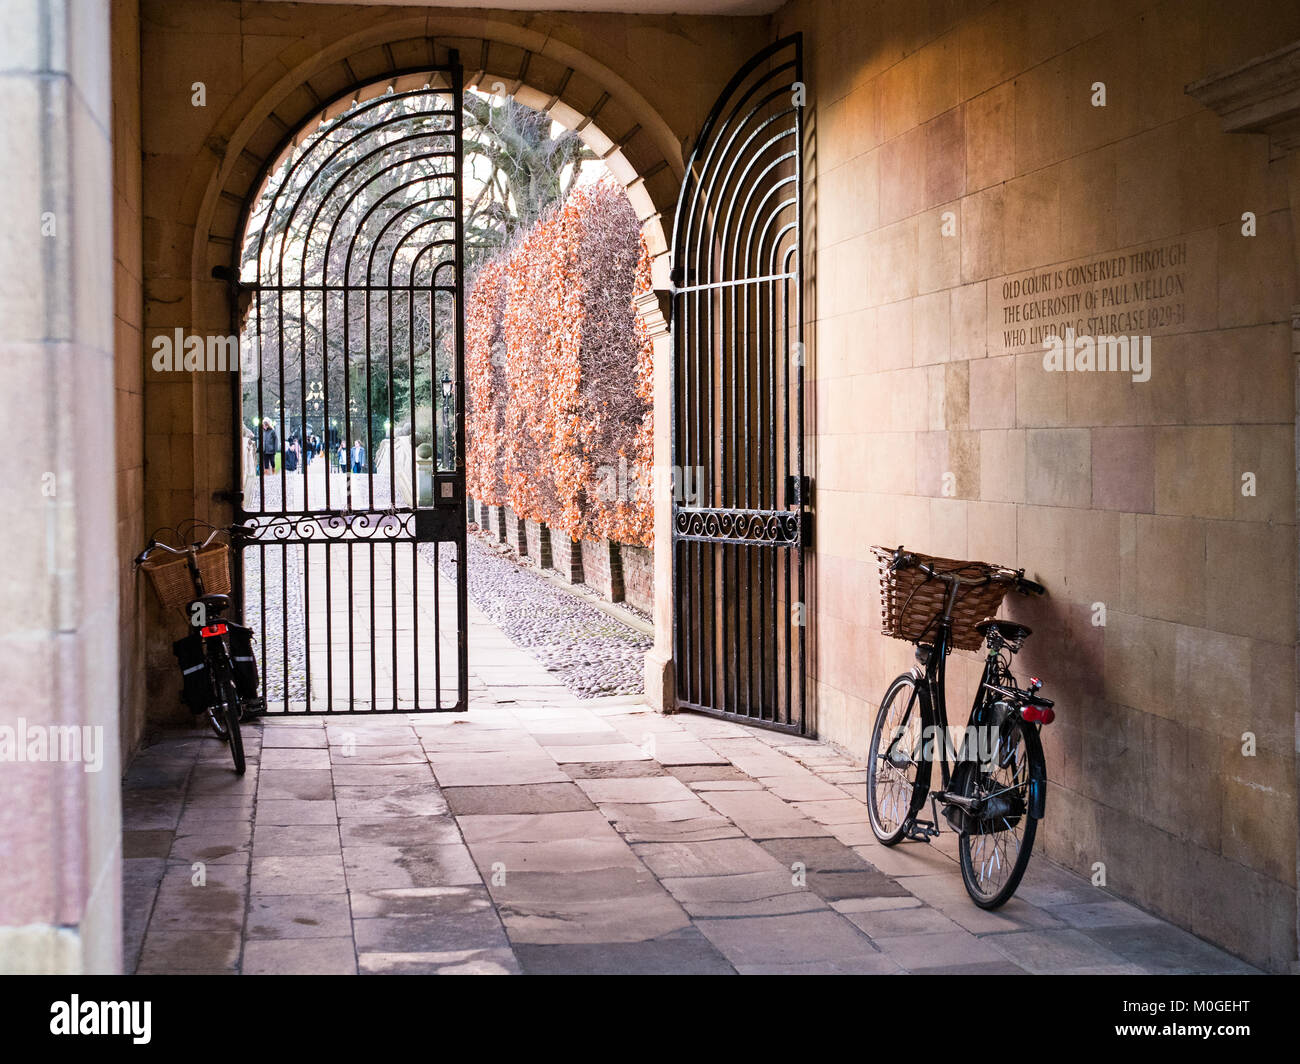 Cambridge Tourism - Student Bike parked in a picturesque gateway in Clare College, part of the University of Cambridge in central Cambridge UK Stock Photo